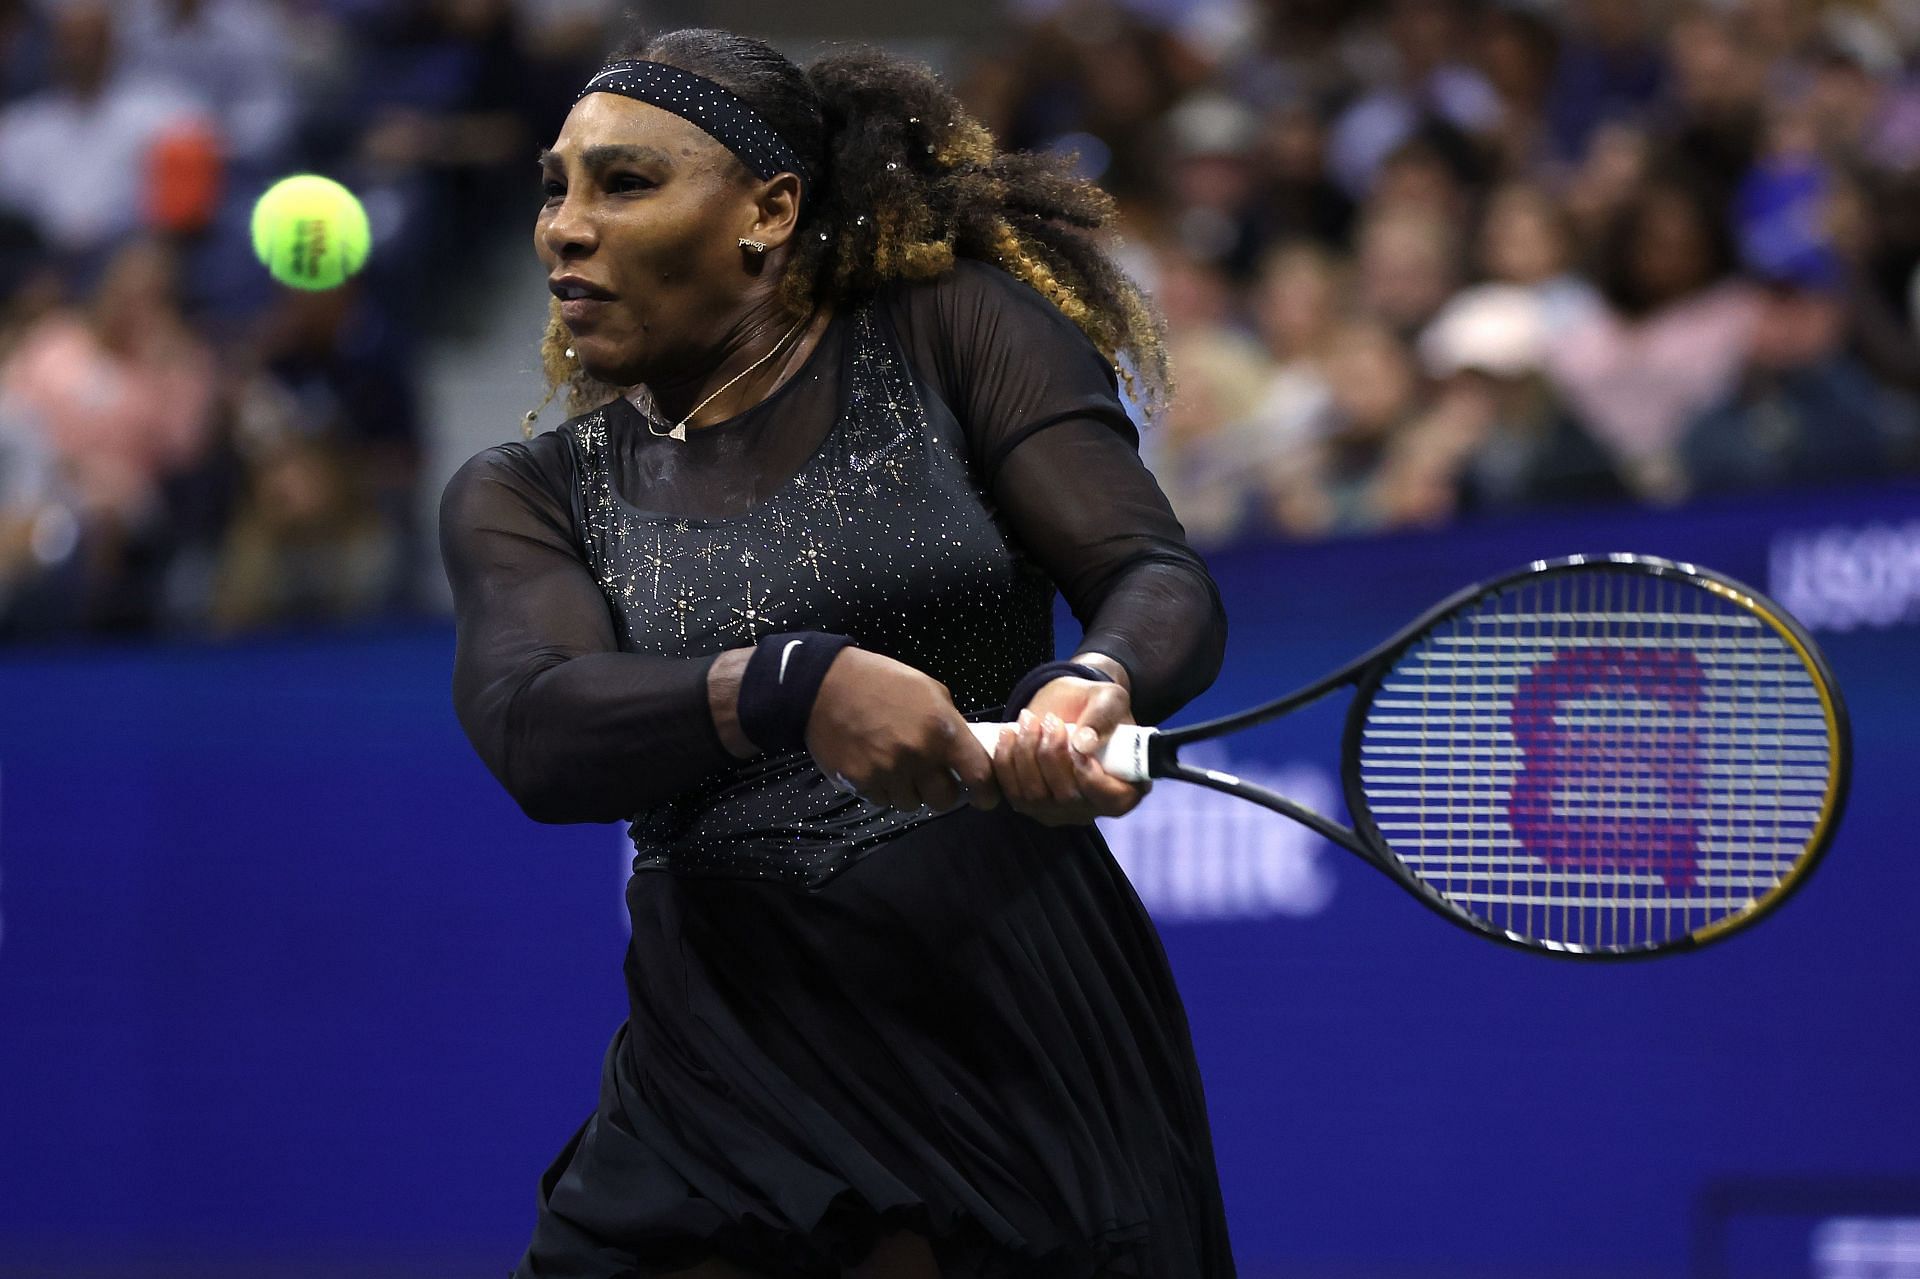 Serena Williams is playing doubles with sister Venus Williams at the 2022 US Open